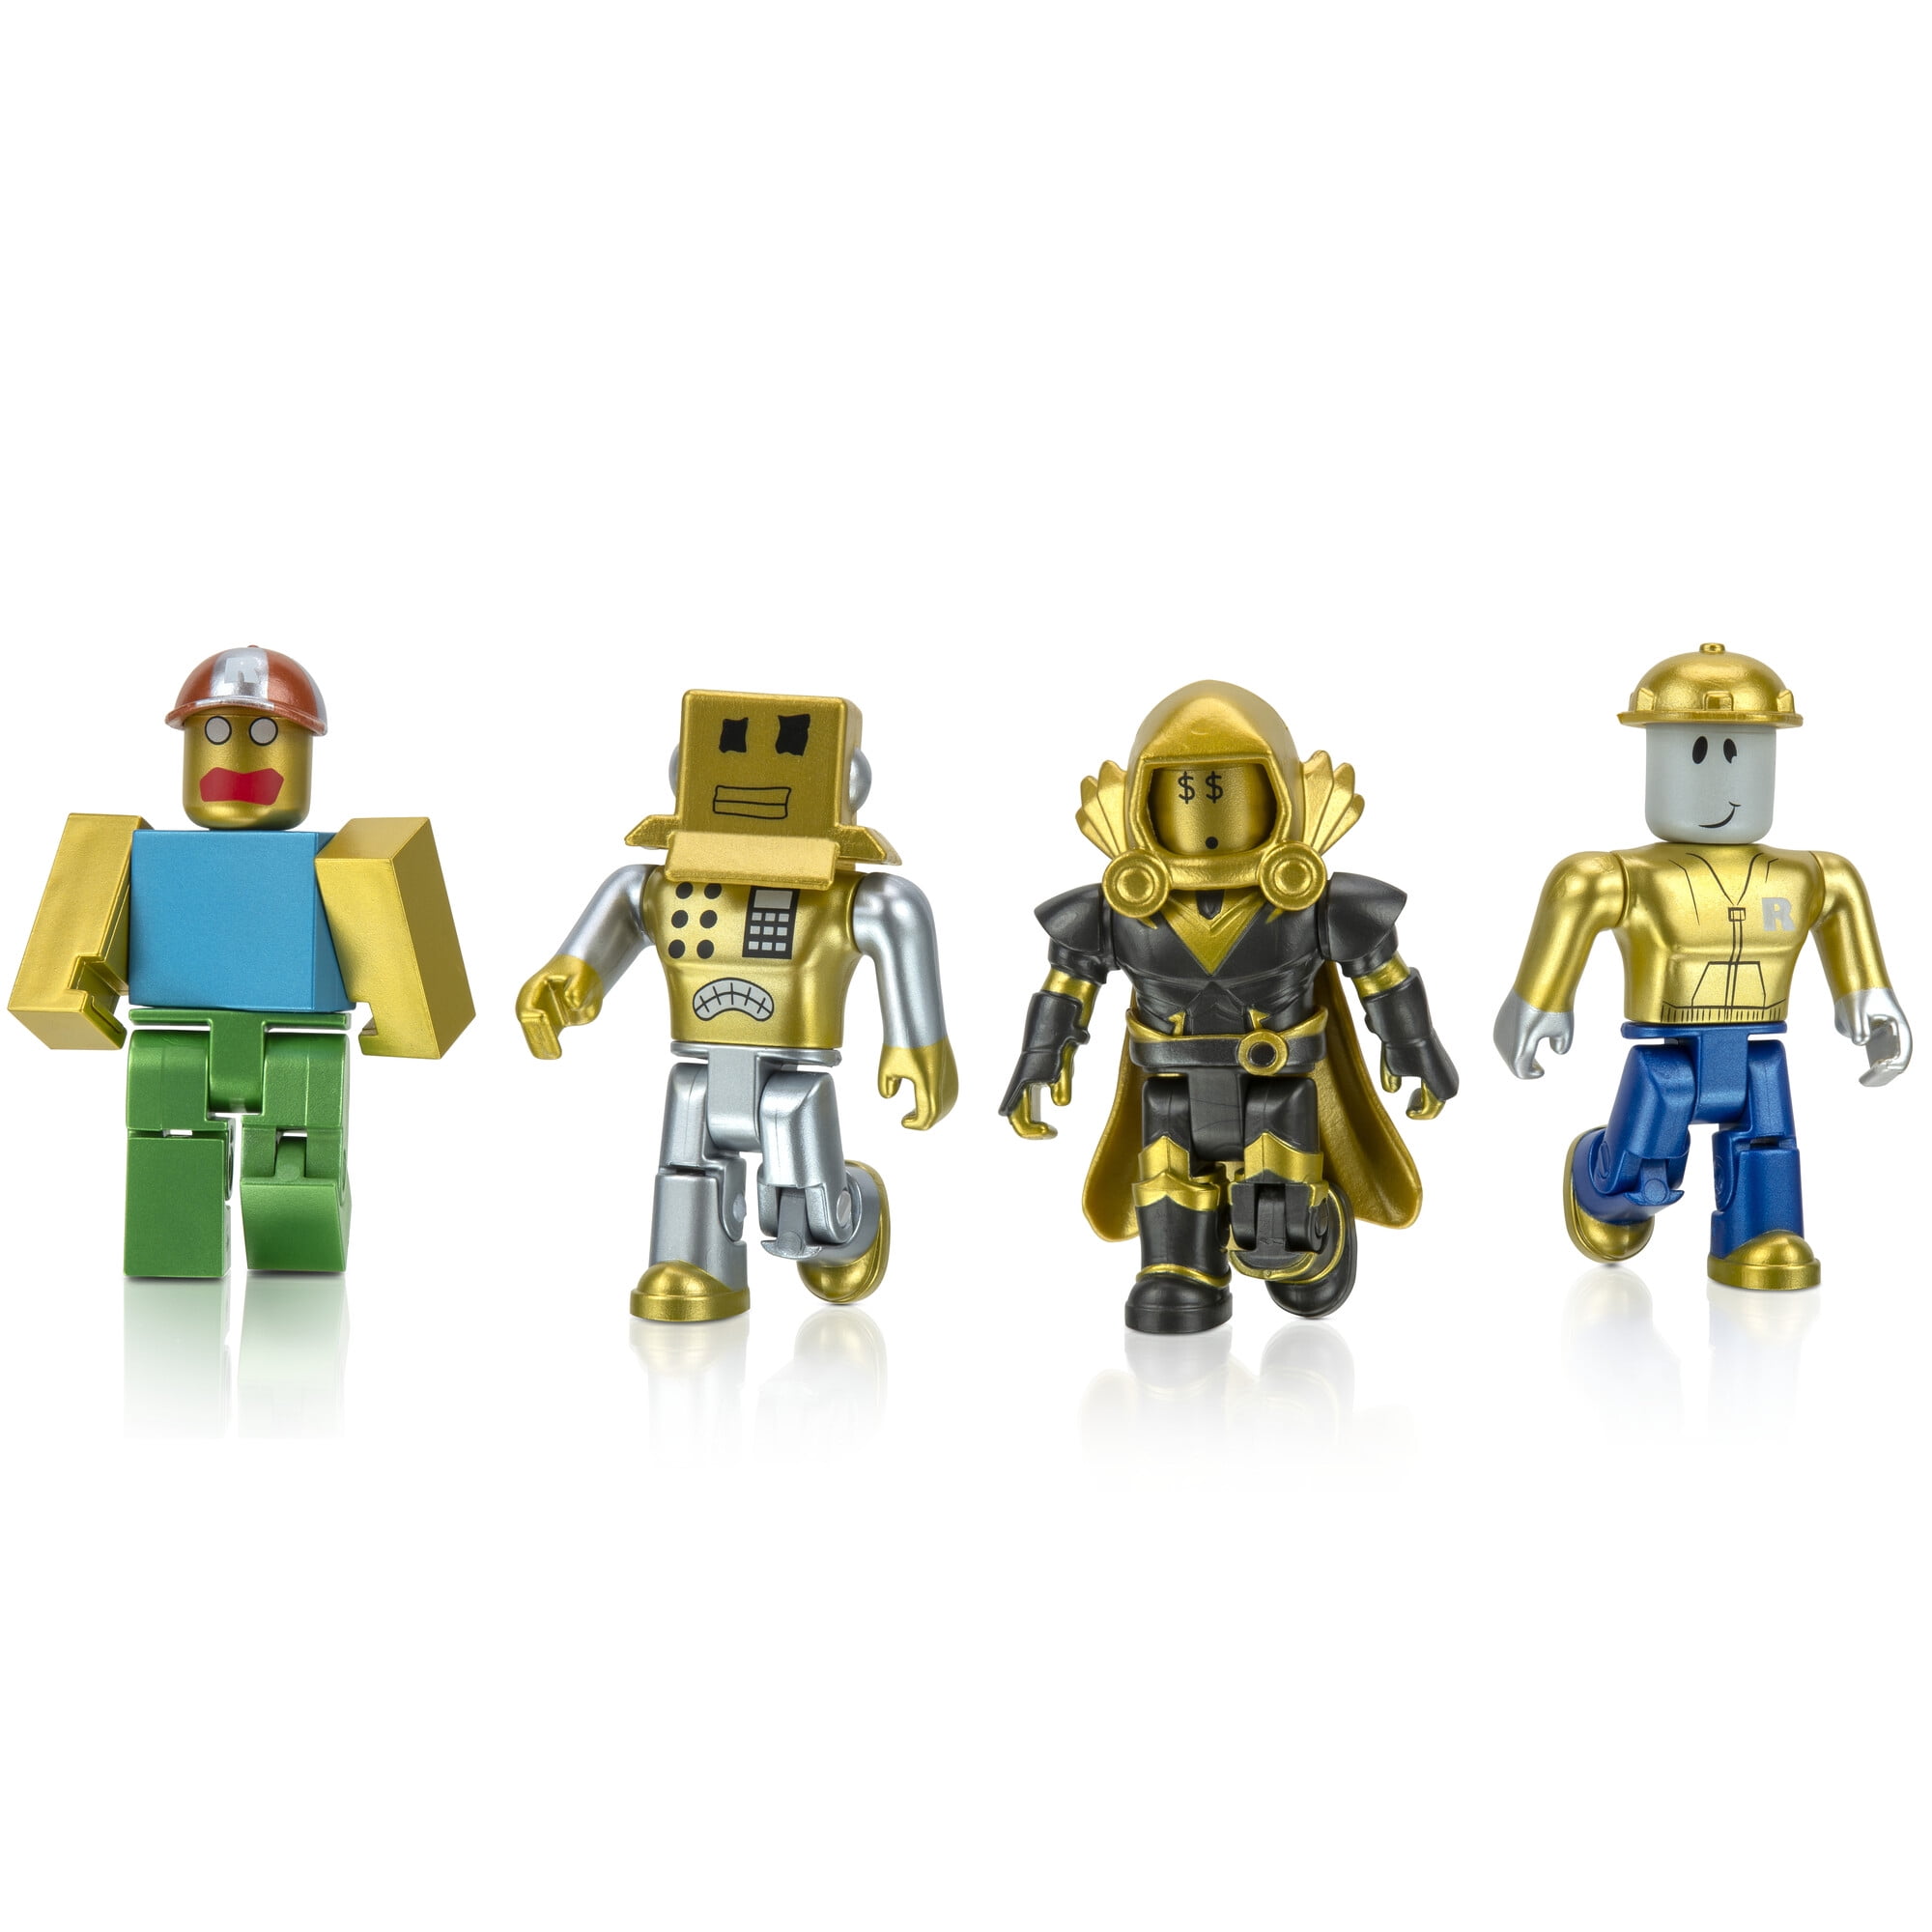  Roblox Action Collection - 15th Anniversary Roblox